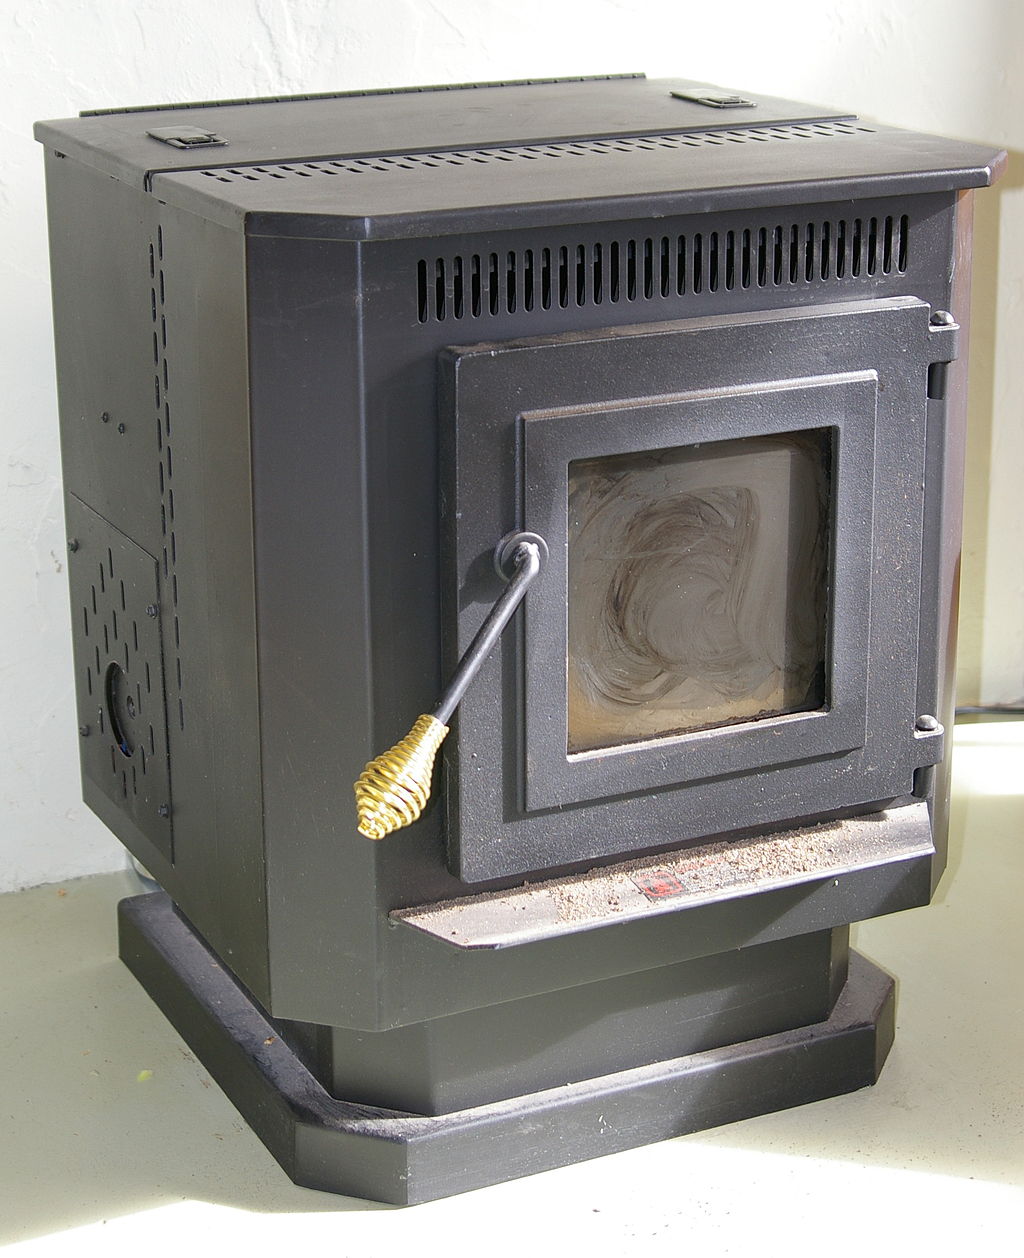 featured image - 5 Reasons Why Pellet Stoves Have Become So Popular